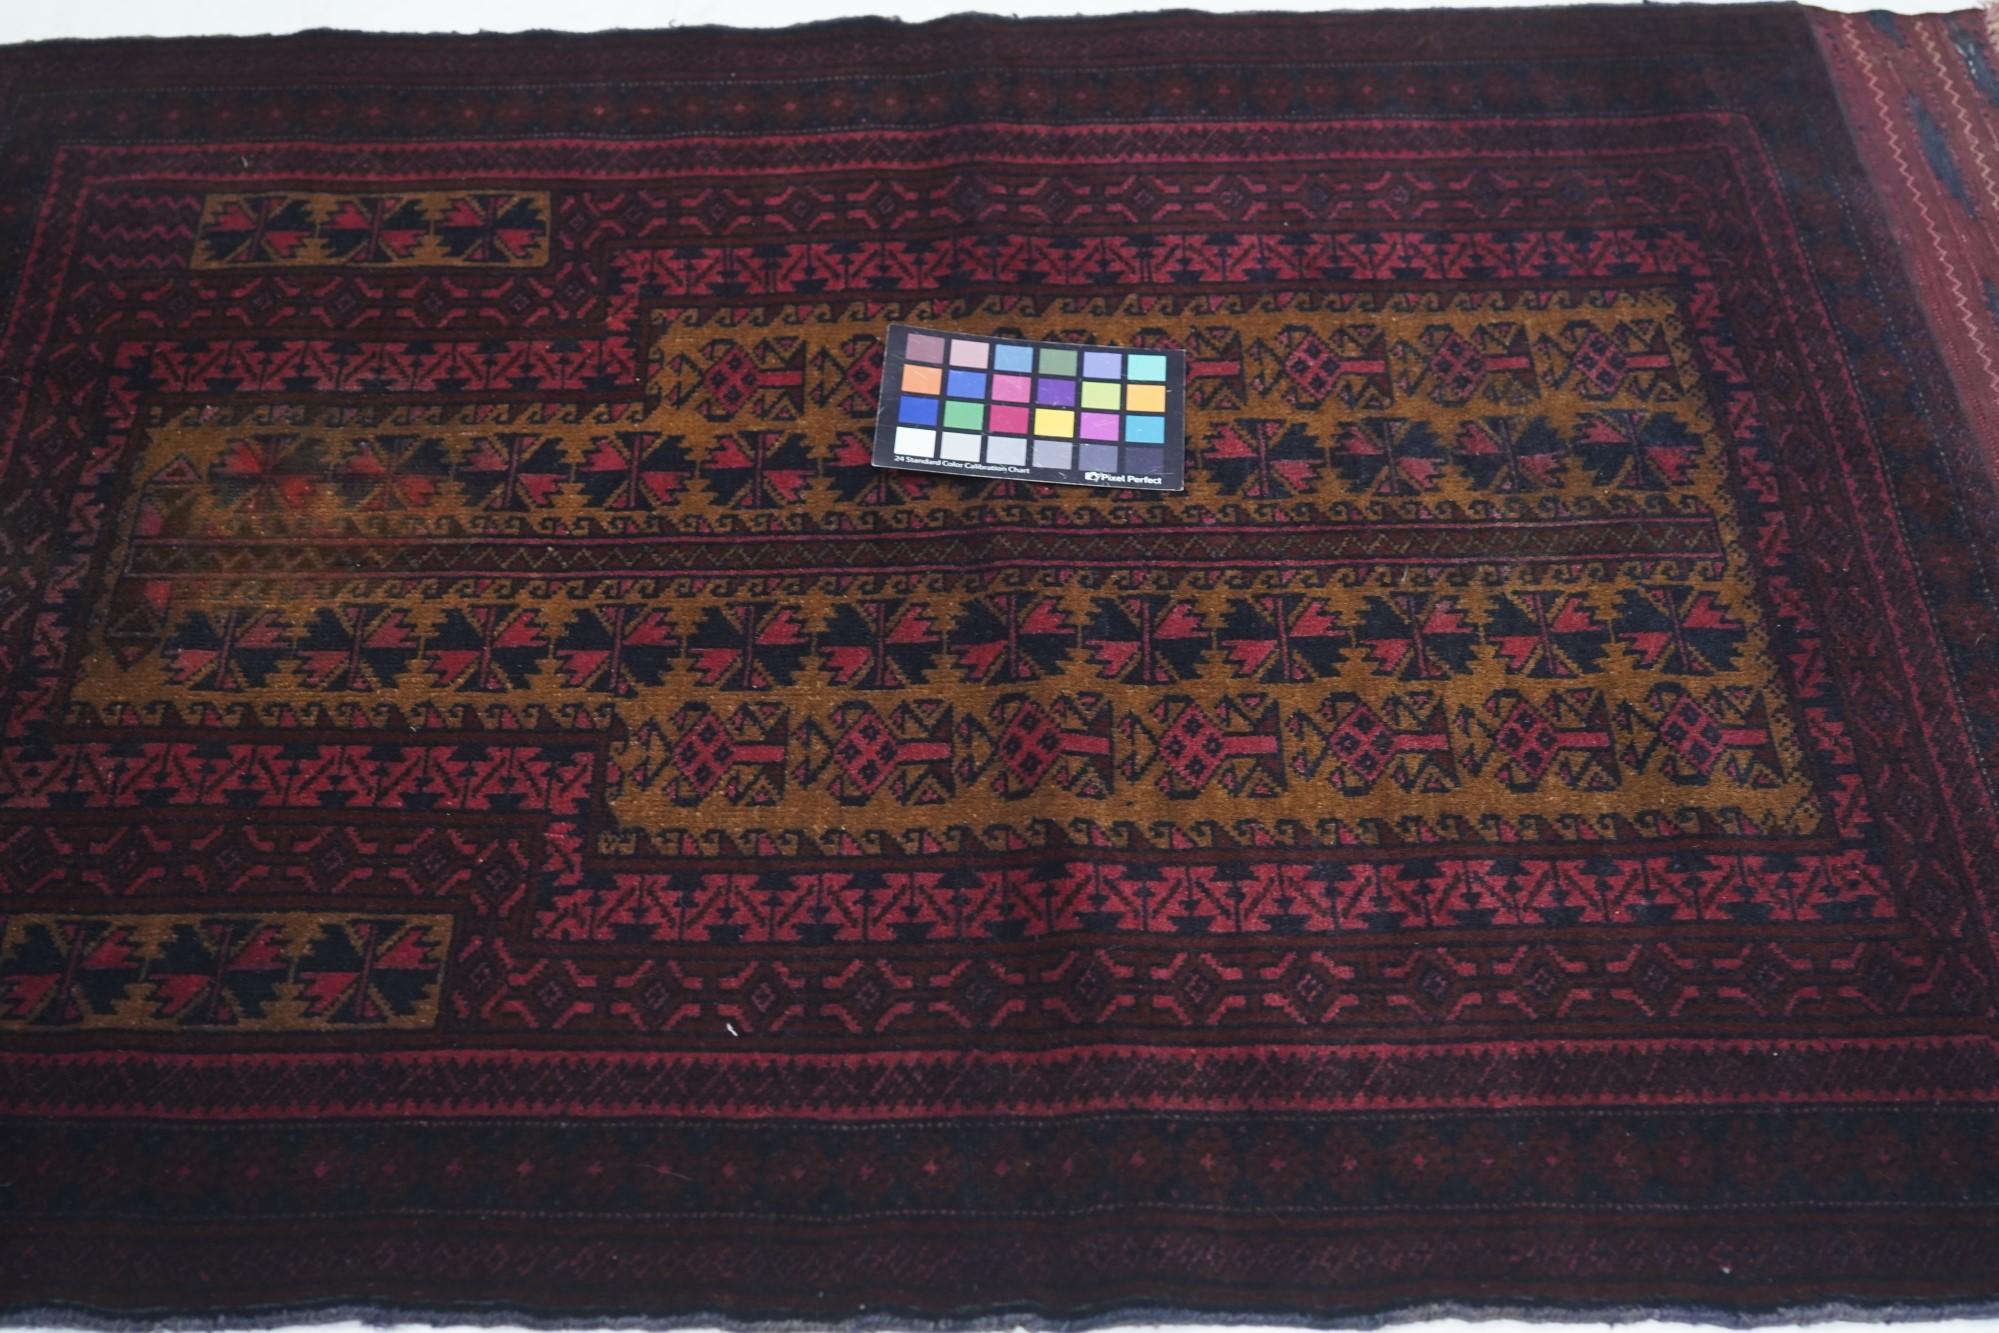 Vintage Balouch Rug For Sale 1